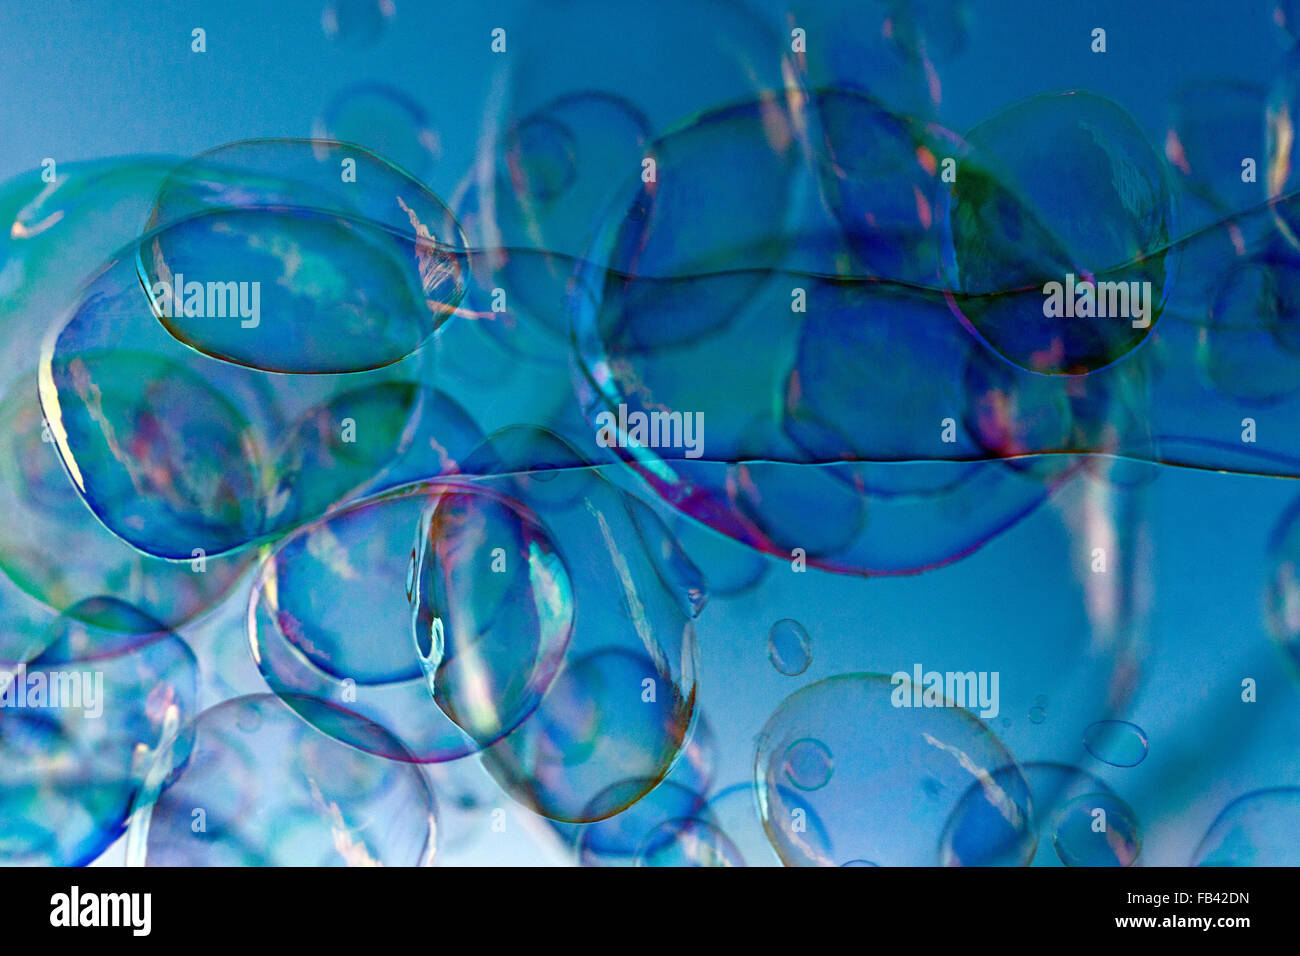 Soap bubbles on a blue abstract background Stock Photo